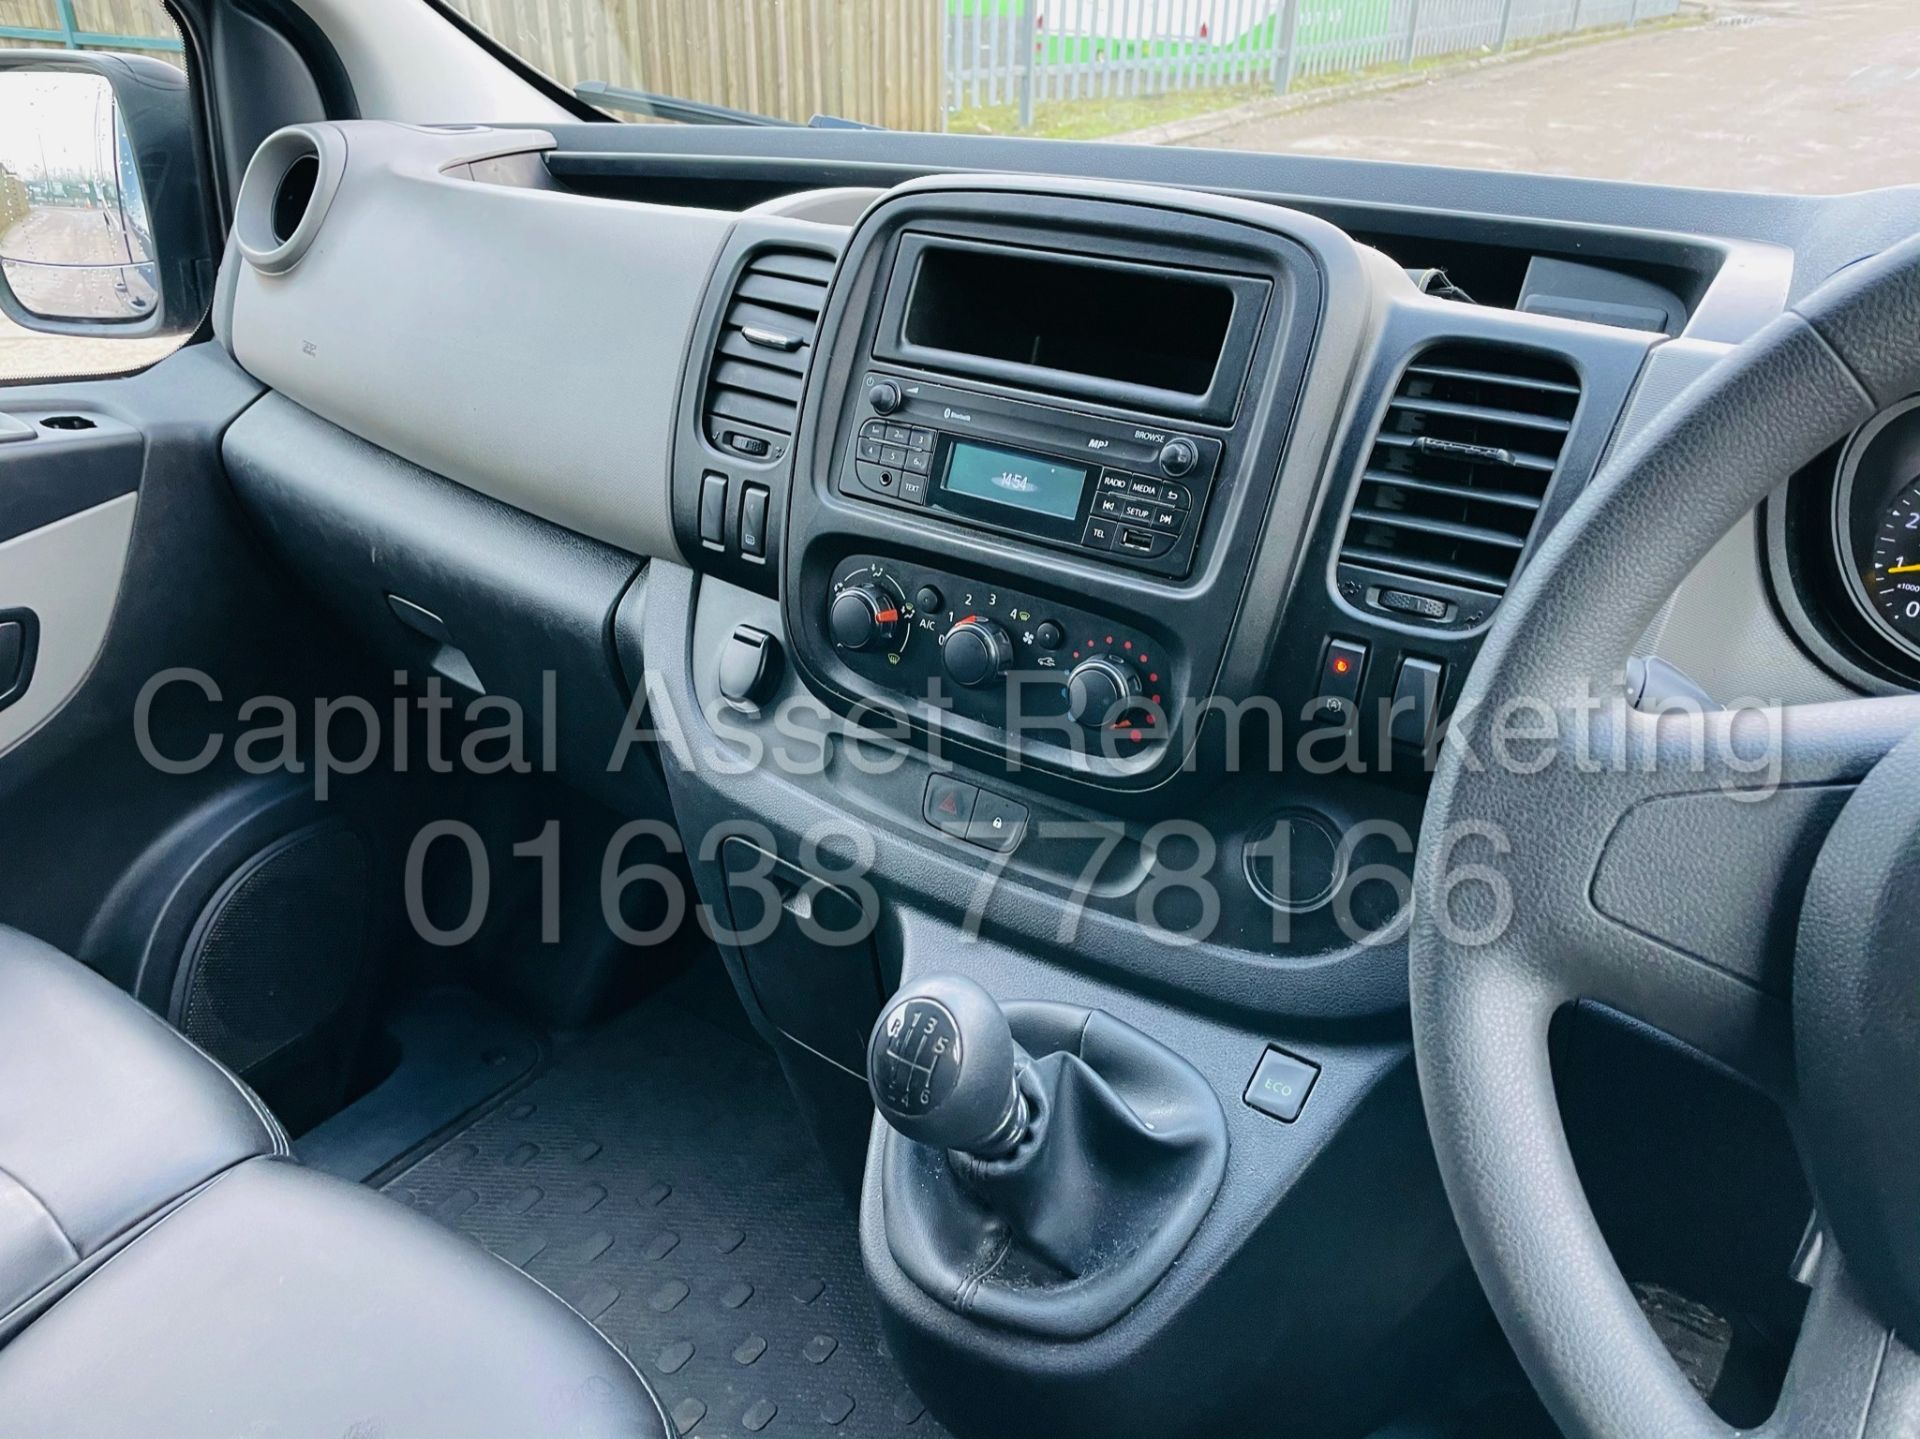 RENAULT TRAFIC *LWB - 9 SEATER MPV / BUS* (2017 - EURO 6) '1.6 DCI - 6 SPEED' *AIR CON* (NO VAT) - Image 39 of 47